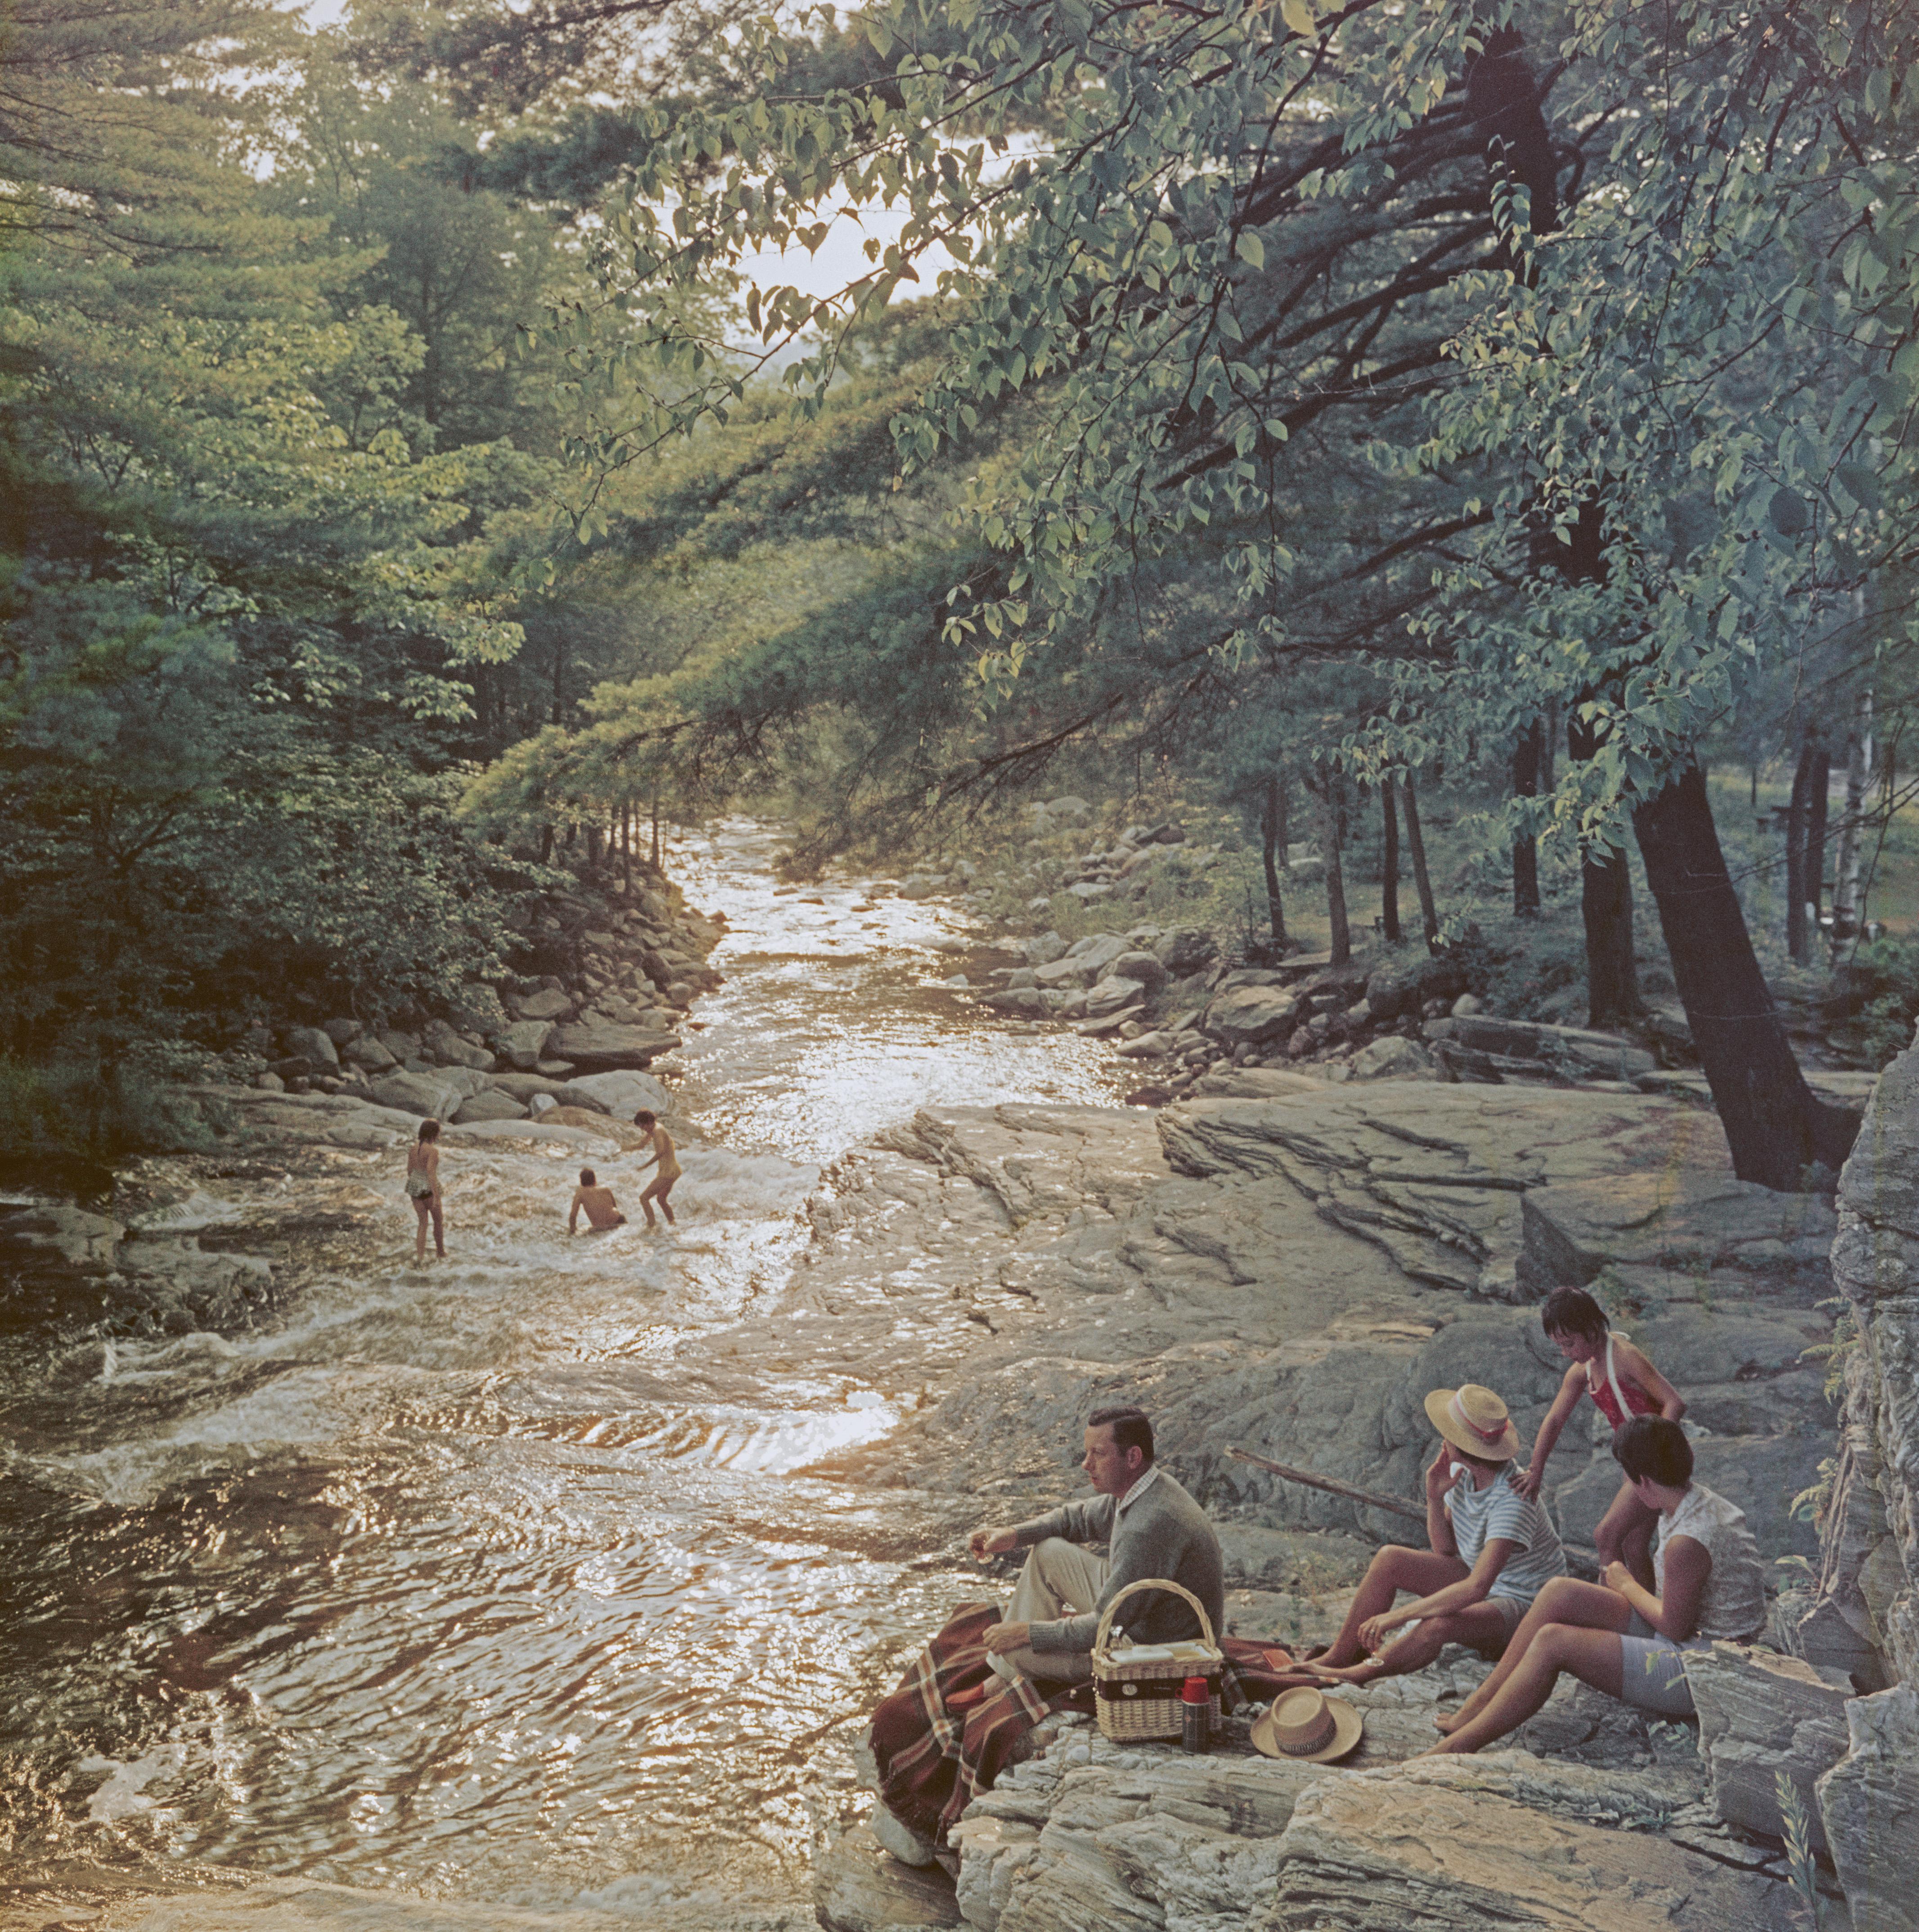 A family enjoying a picnic on the bank of the Whiting River near Campbell Falls, Massachusetts, USA, 1959. 

Once a year, we uncover never-before-seen Slim Aarons images! This is one of fifteen from our new collection. A word from our Curator Shawn